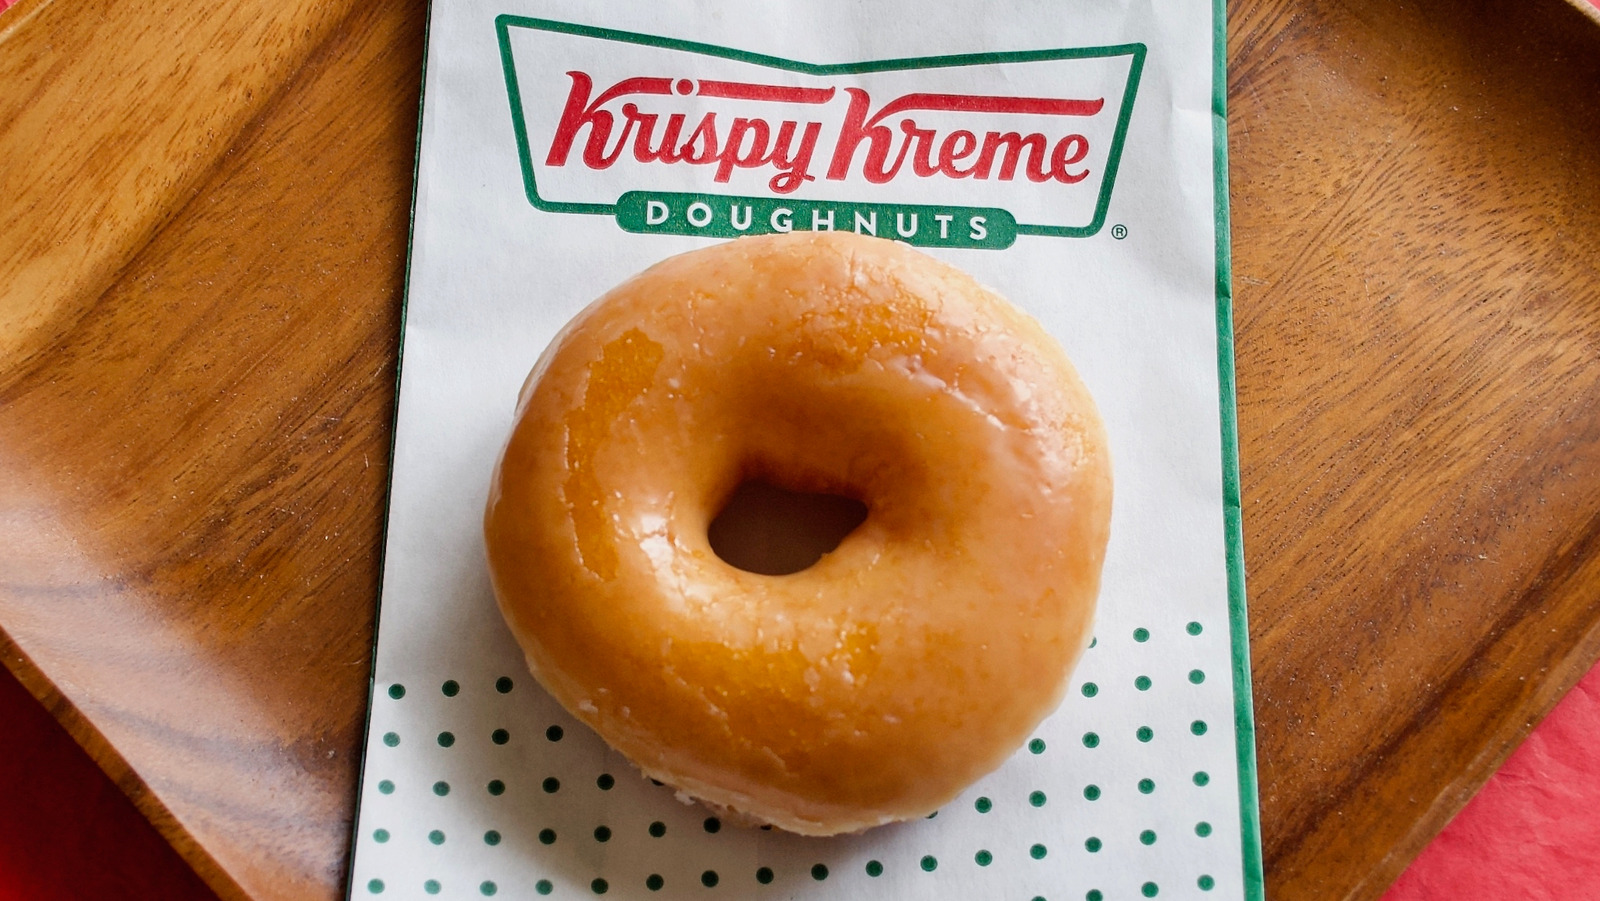 Krispy Kreme Is Giving Away Donuts To New Graduates, But There's A Catch